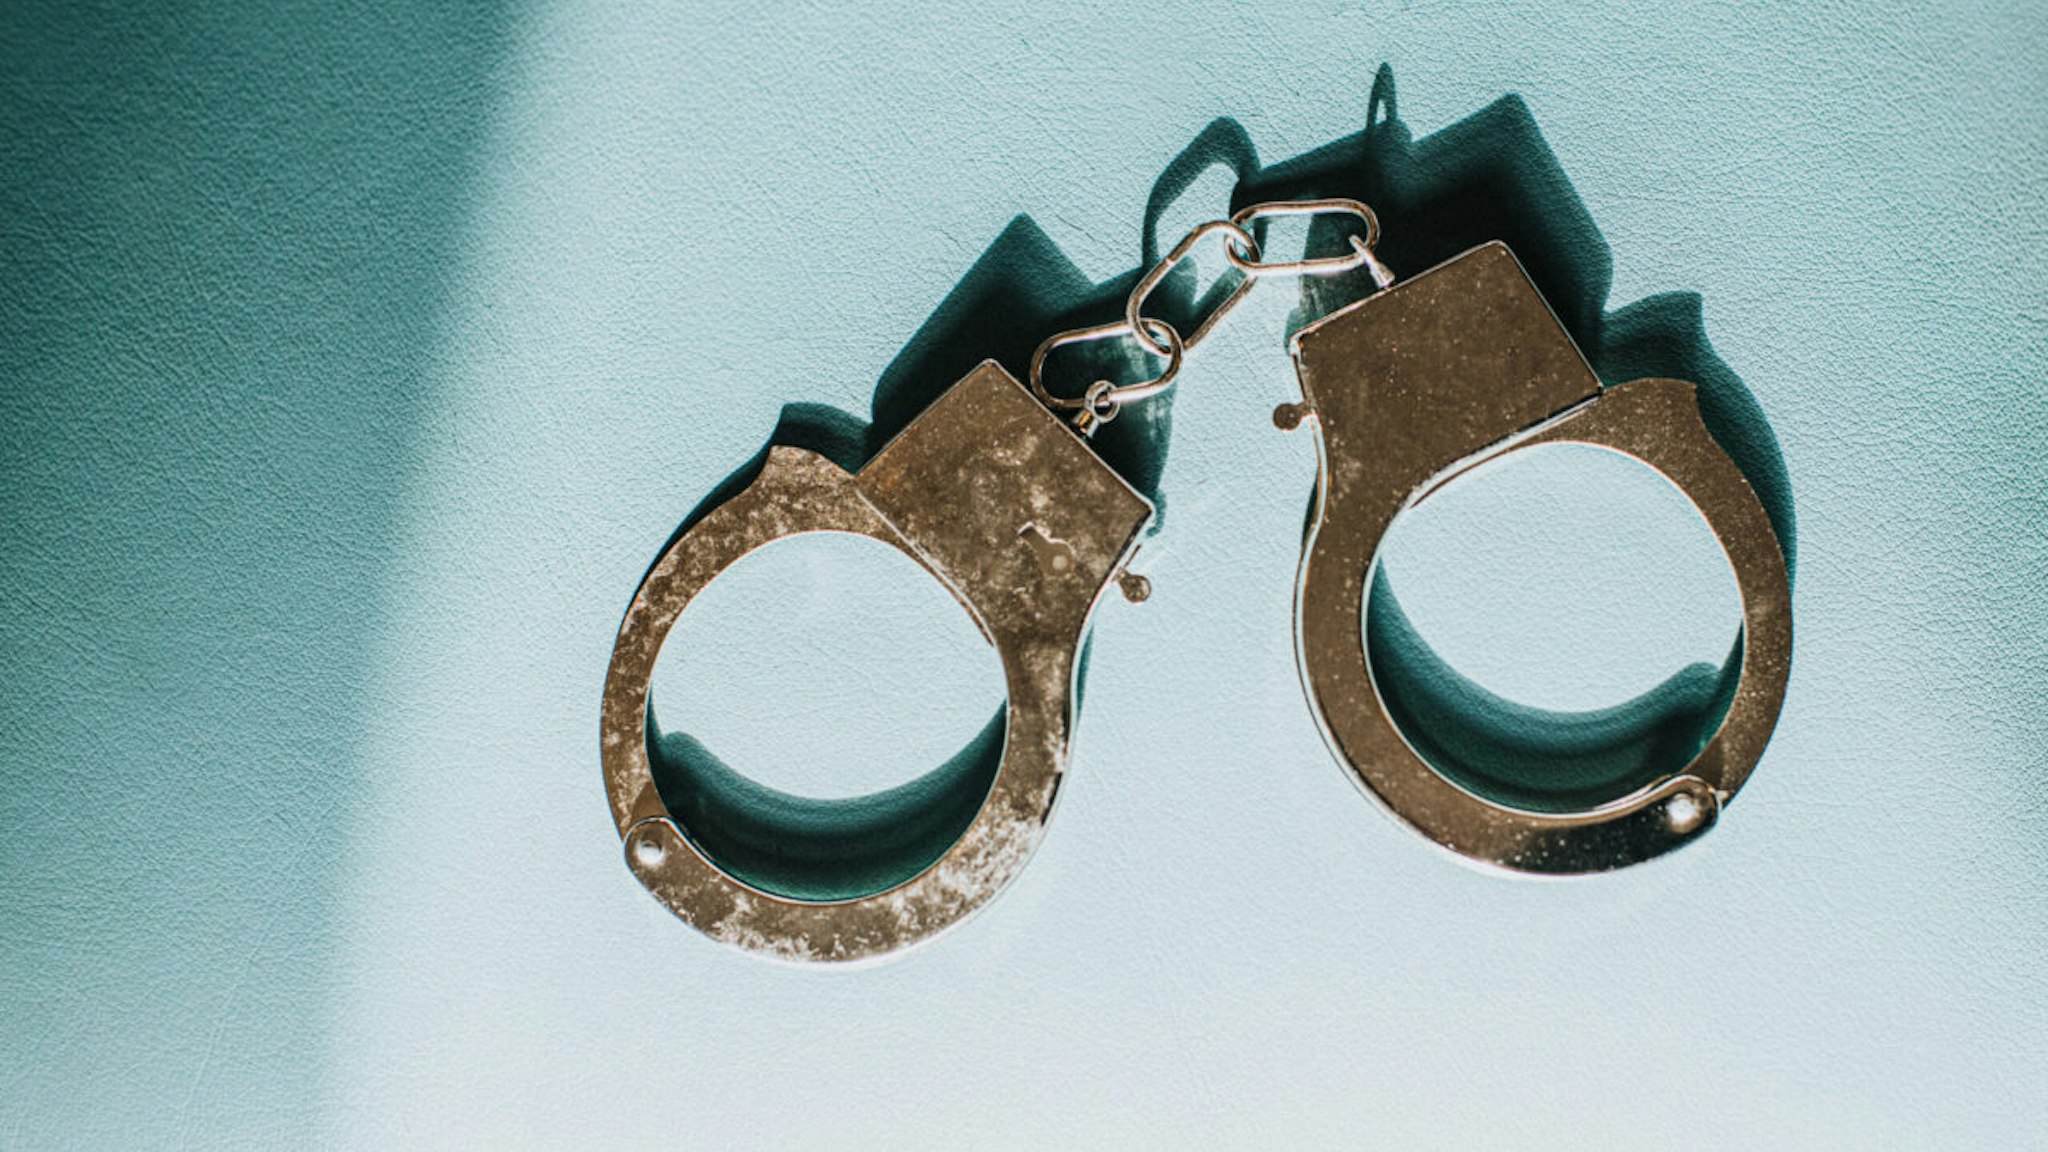 Shiny silver metal handcuffs on blue surface with space for copy.